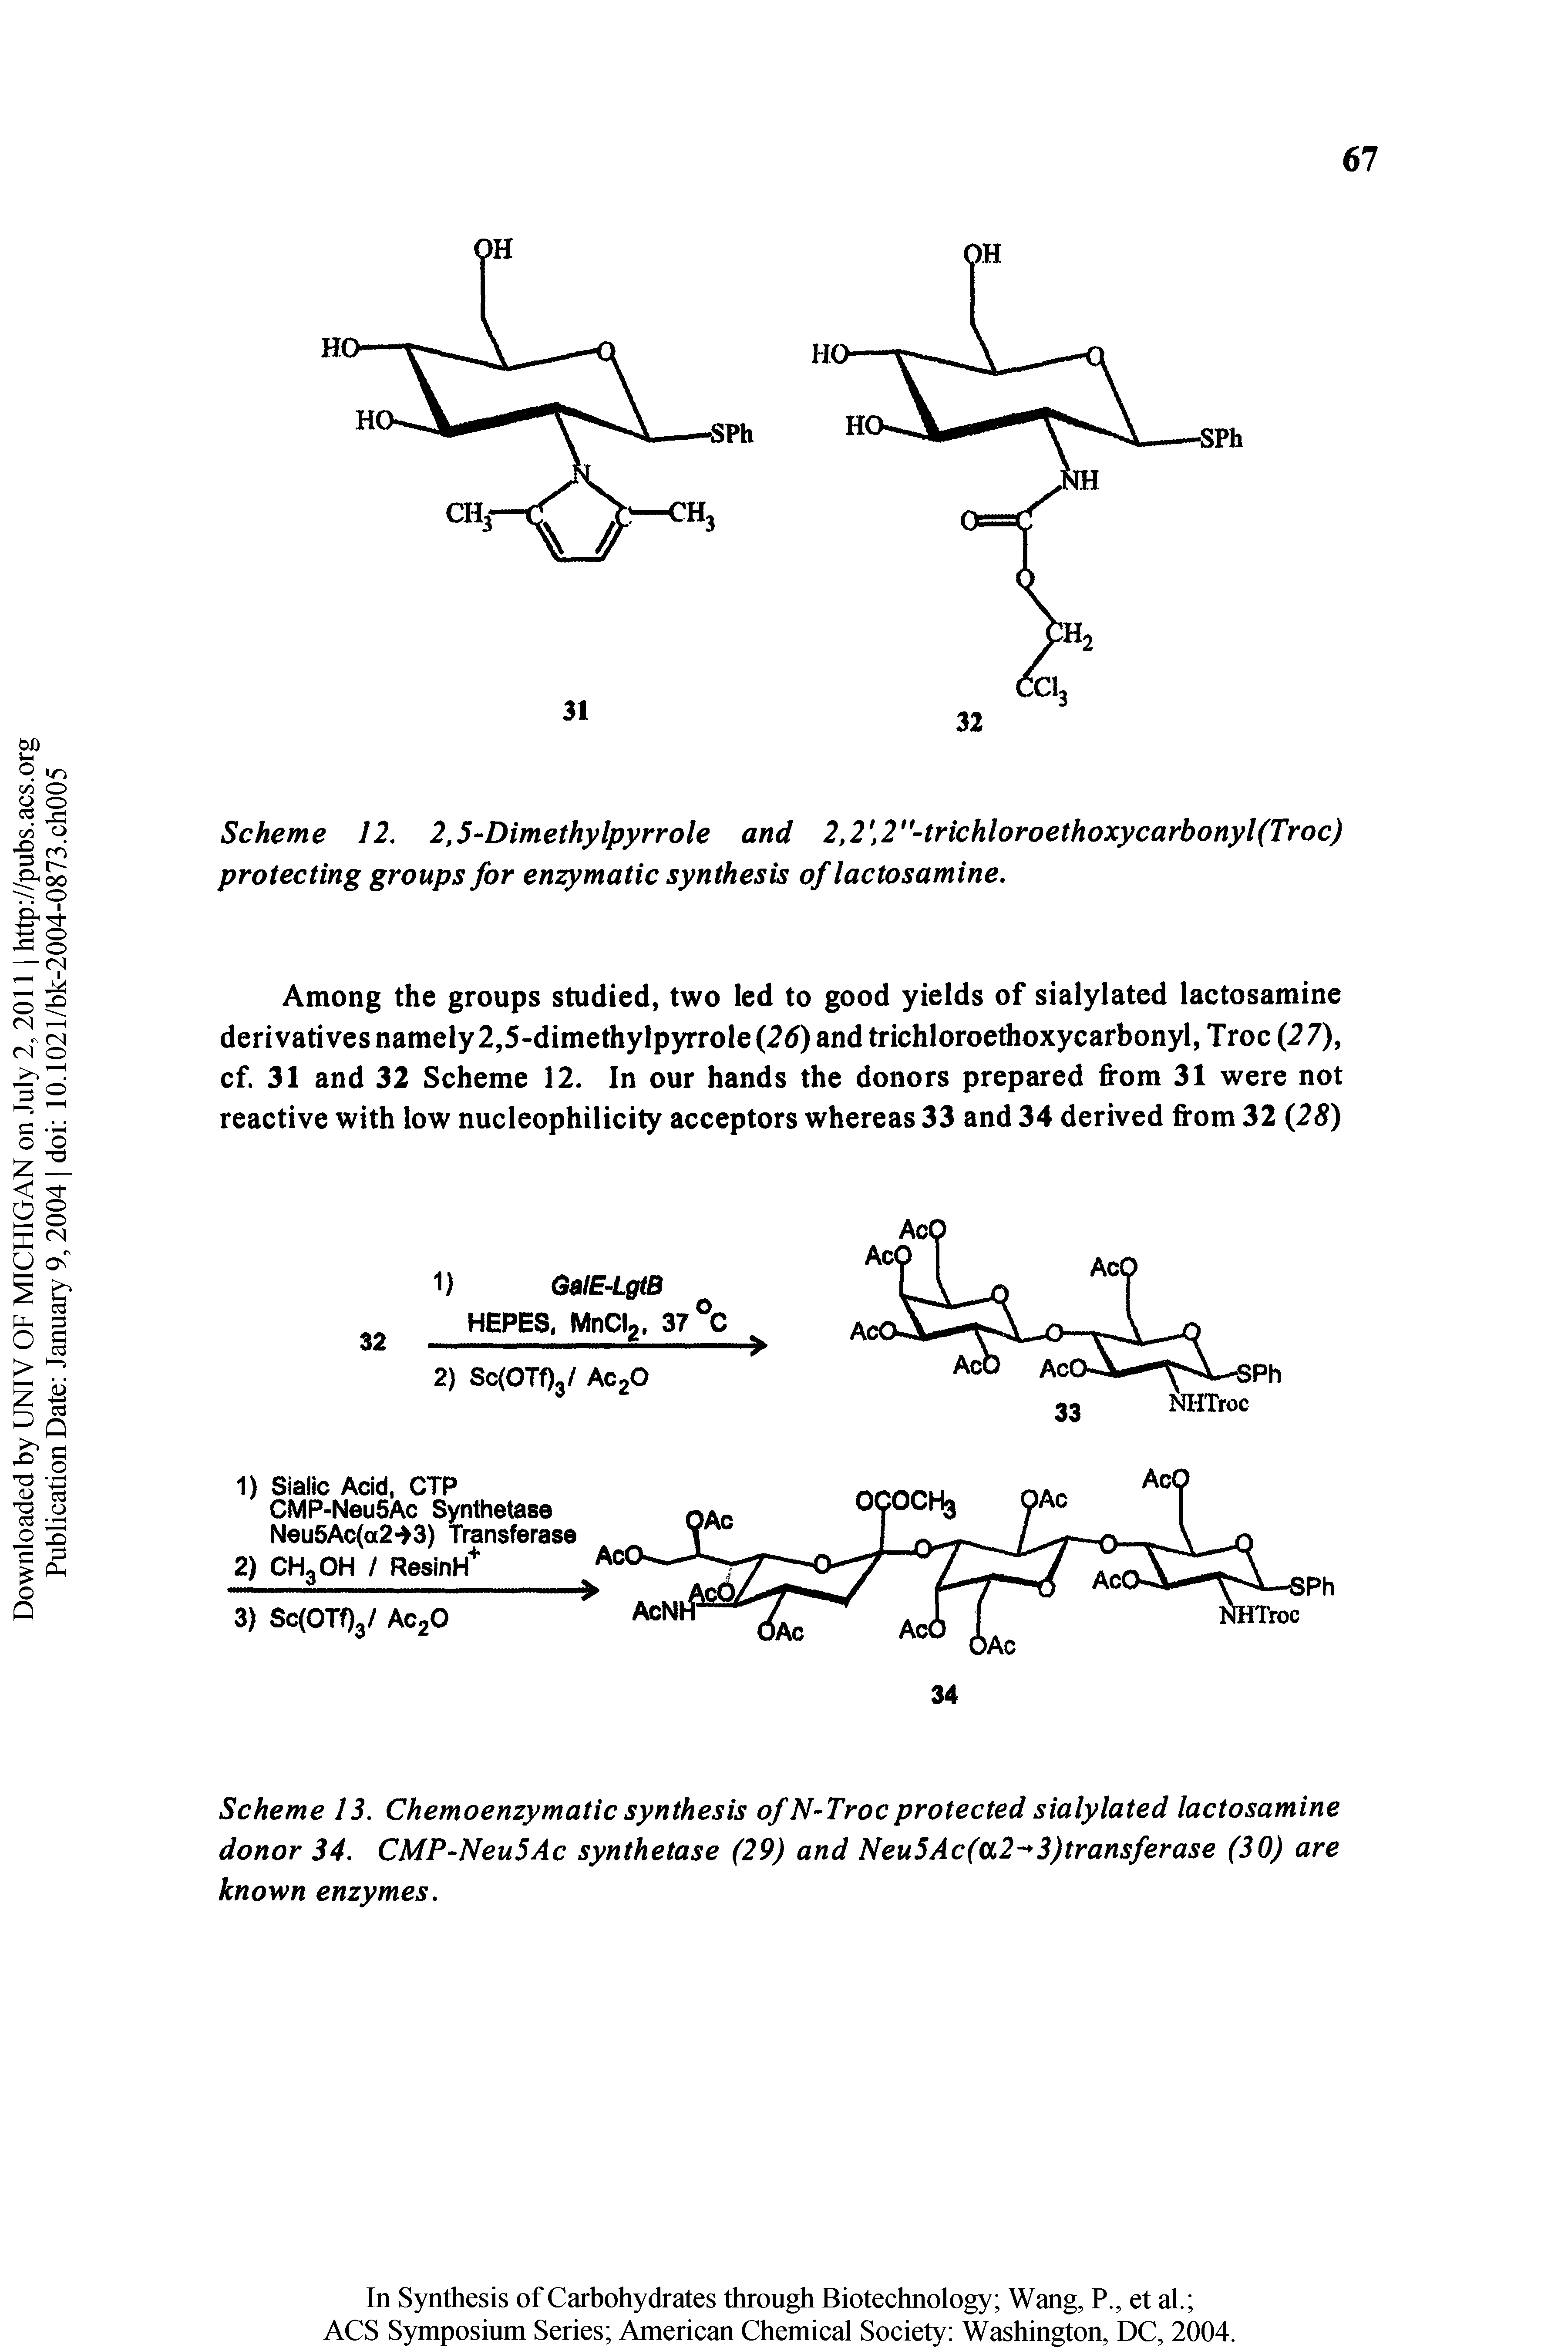 Scheme 13. Chemoenzymatic synthesis of N-Trocprotected sialylated lactosamine donor 34. CMP-NeuSAc synthetase (29) and Neu5Ac(a2- 3)transferase (30) are known enzymes.